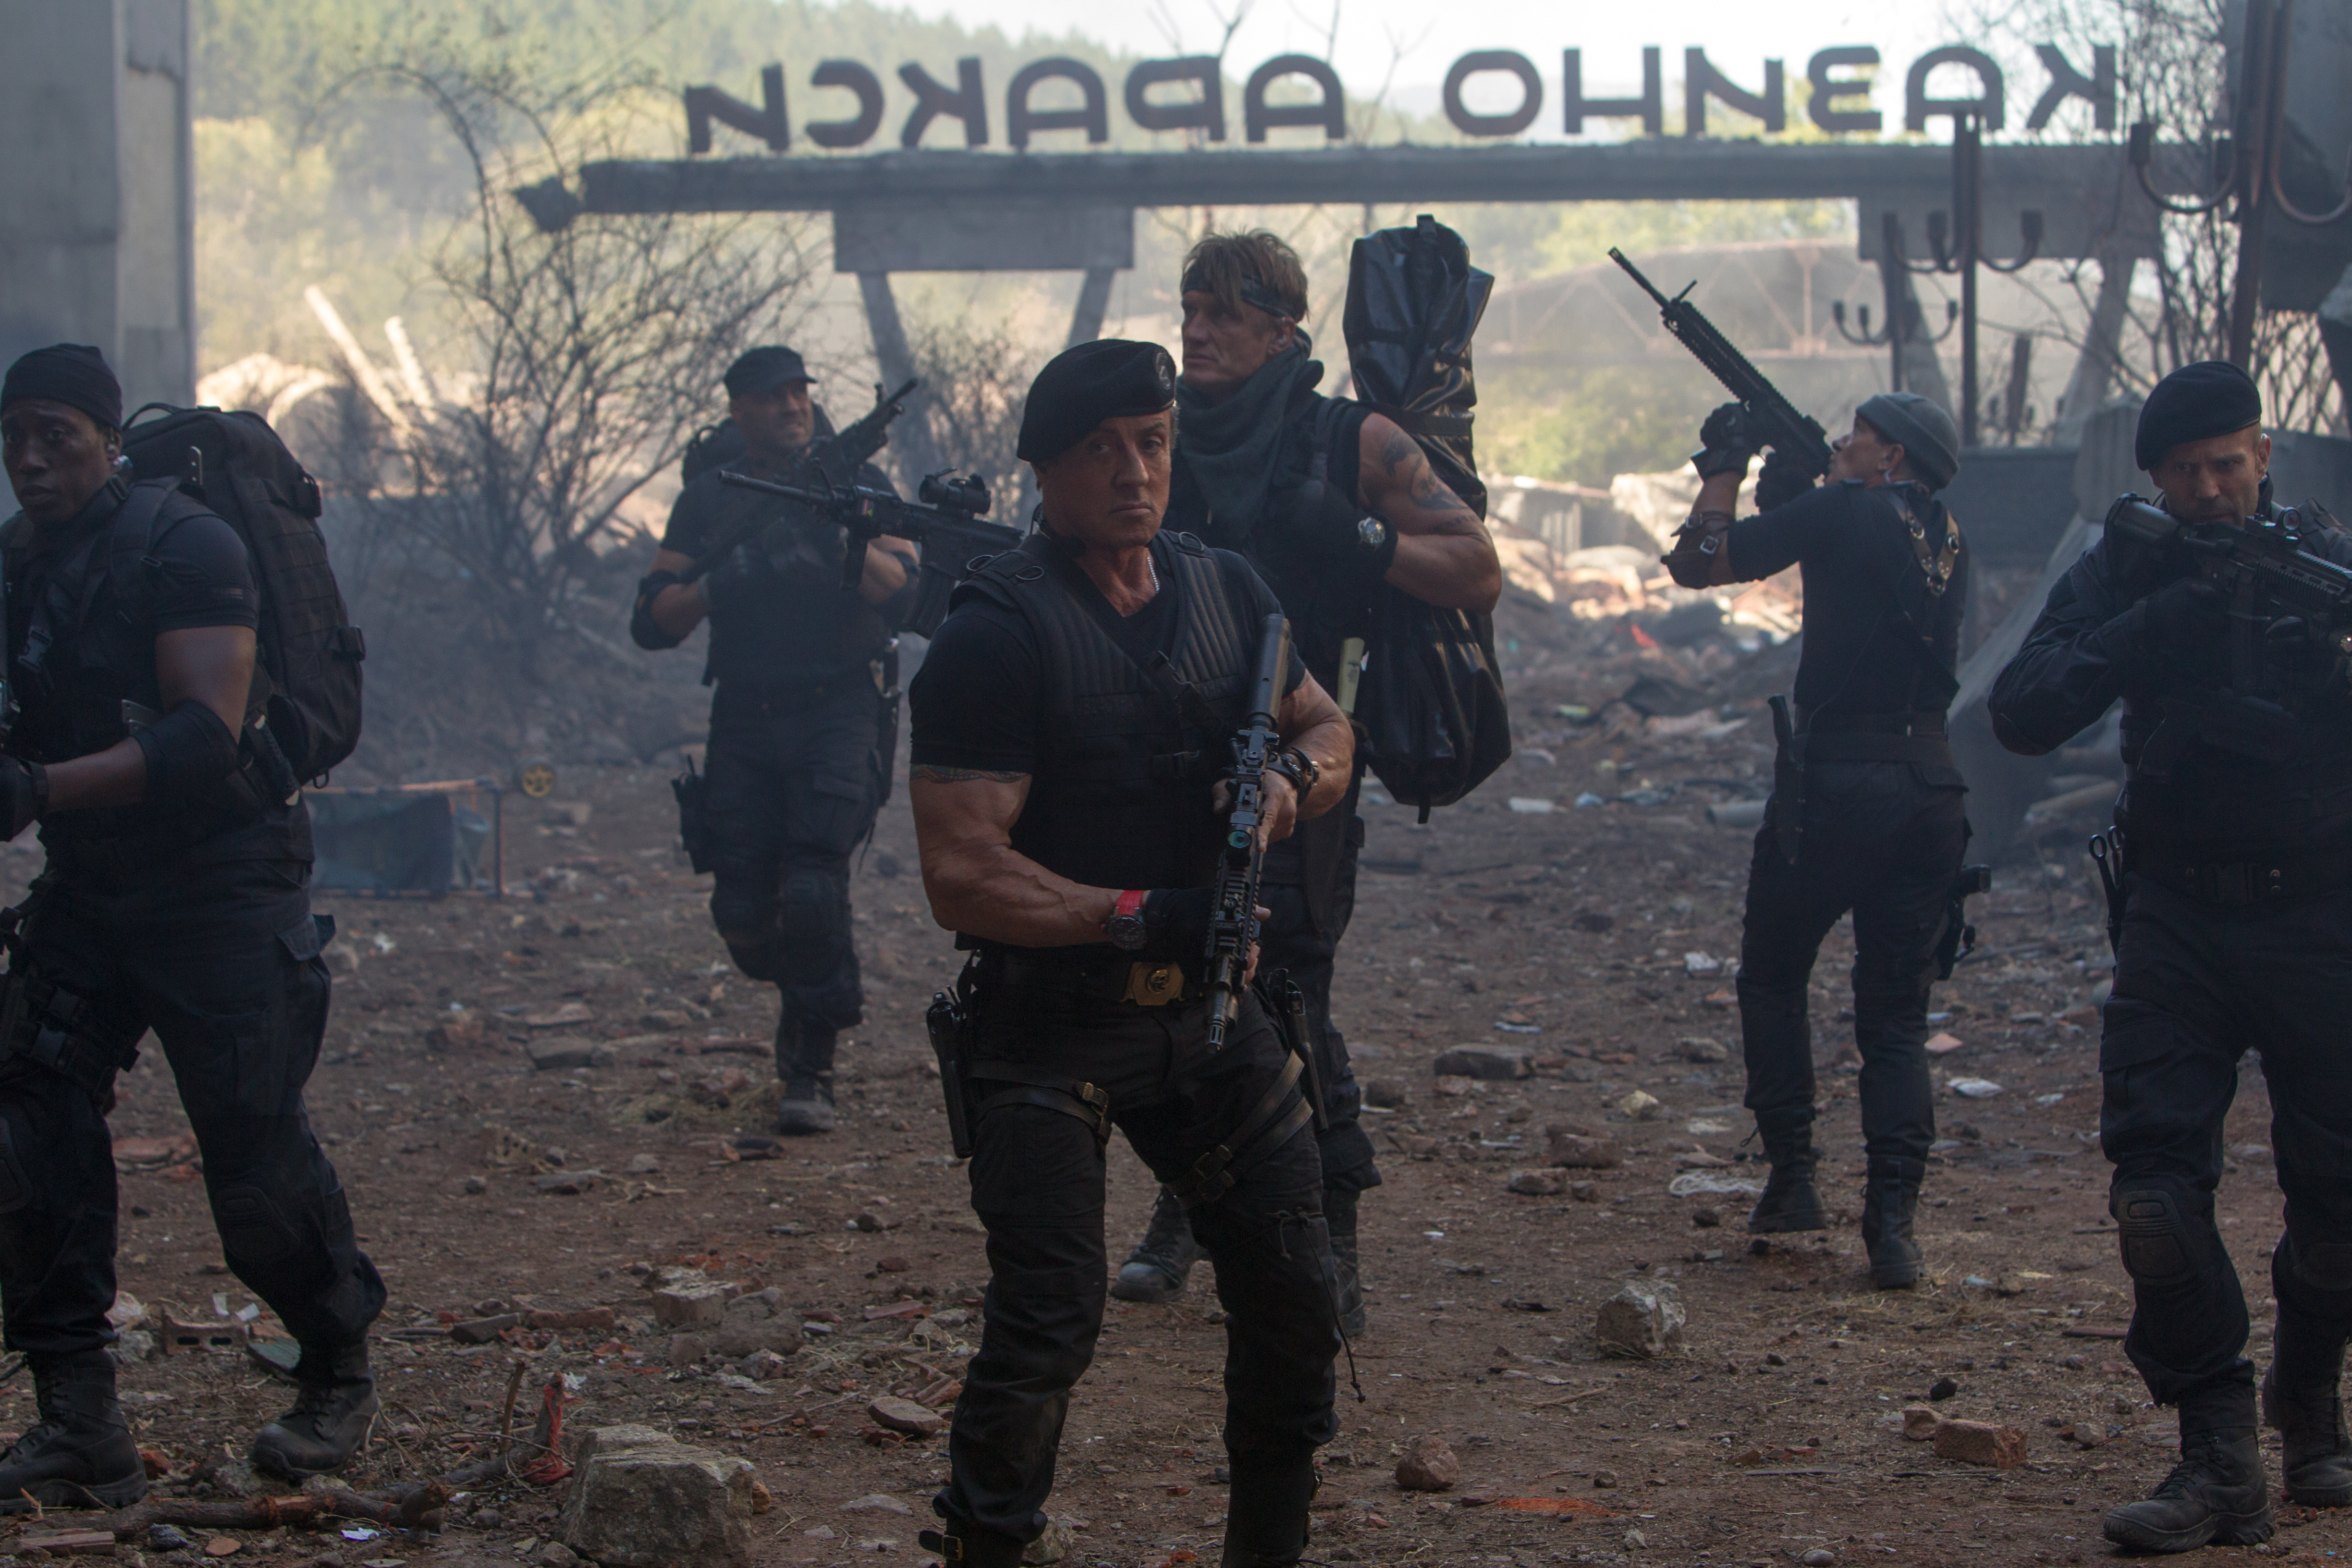 movie, the expendables 3, antonio banderas, barney ross, doc (the expendables), dolph lundgren, galgo (the expendables), gunnar jensen, jason statham, lee christmas, randy couture, sylvester stallone, toll road, wesley snipes, the expendables Phone Background